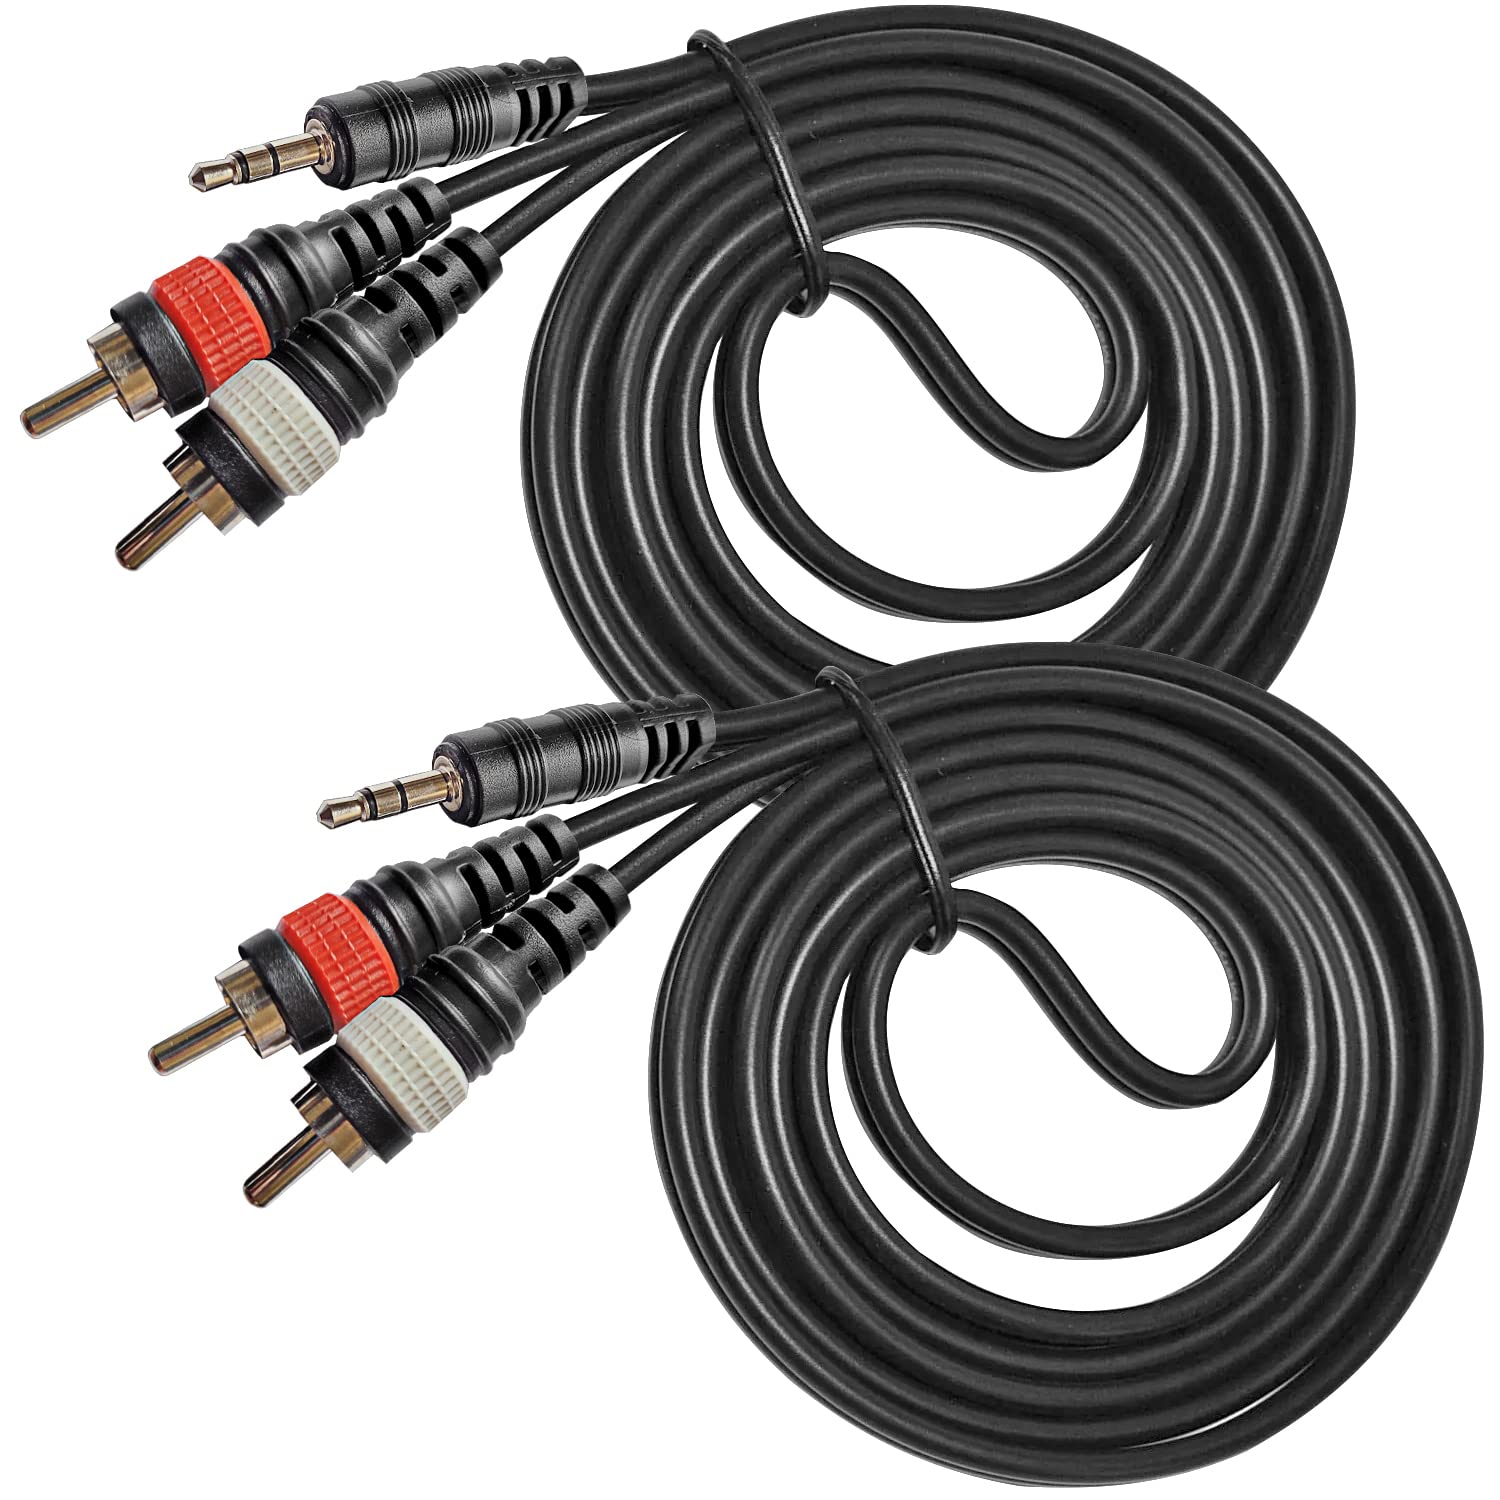 AxcessAbles Dual 1/4 Inch TS to Dual RCA Audio Interconnect Cable 6ft - 10  Pack, Dual 6.35mm Male Jack to Dual RCA, 6ft DTRS to DRCA Unbalanced  Patch Cables (10-Pack)